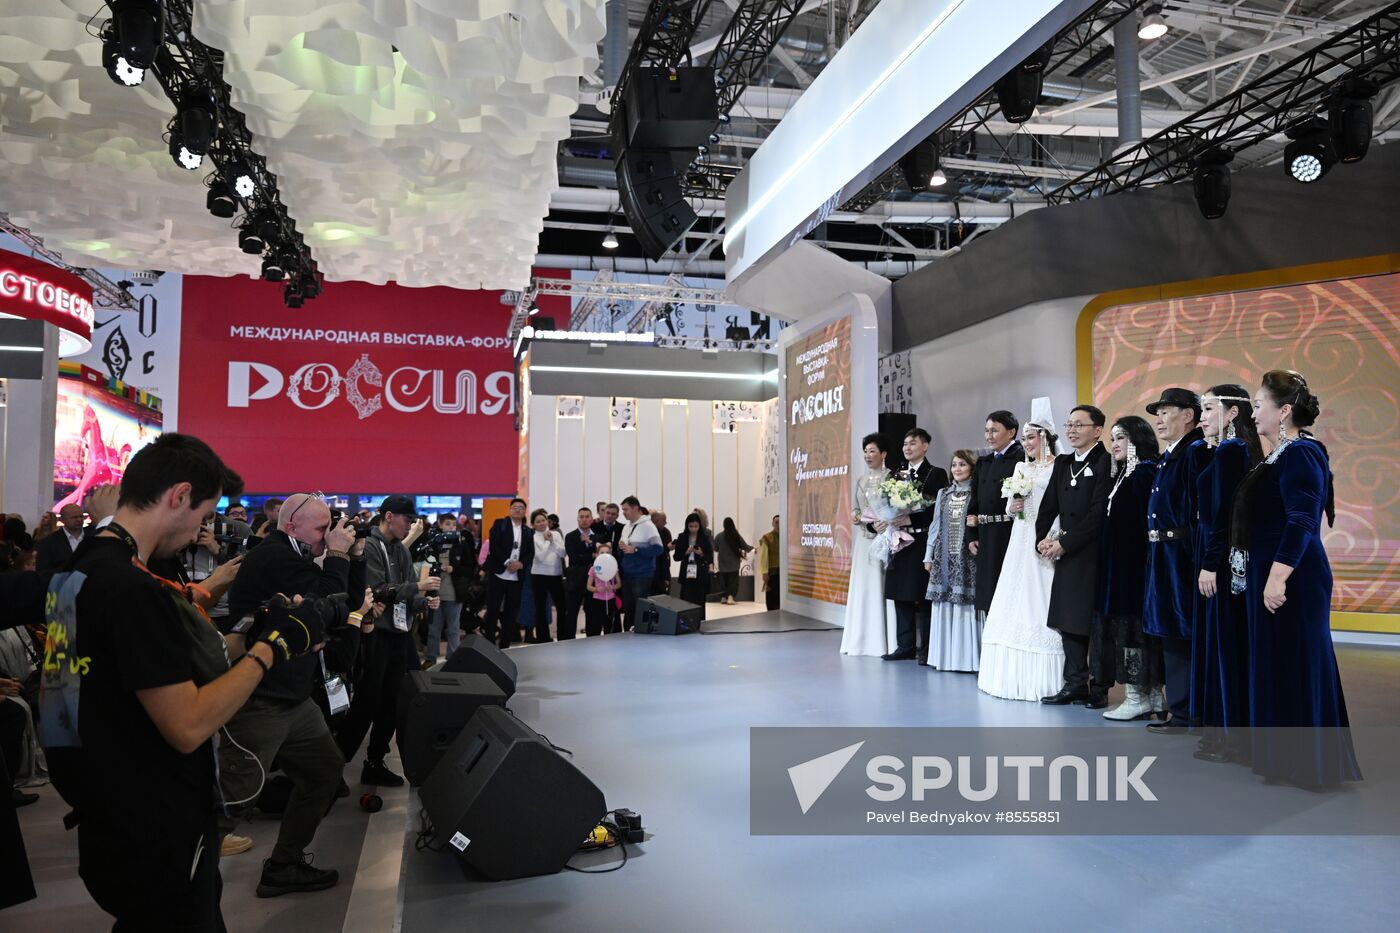 RUSSIA EXPO. Wedding ceremony with Yakut traditional rituals